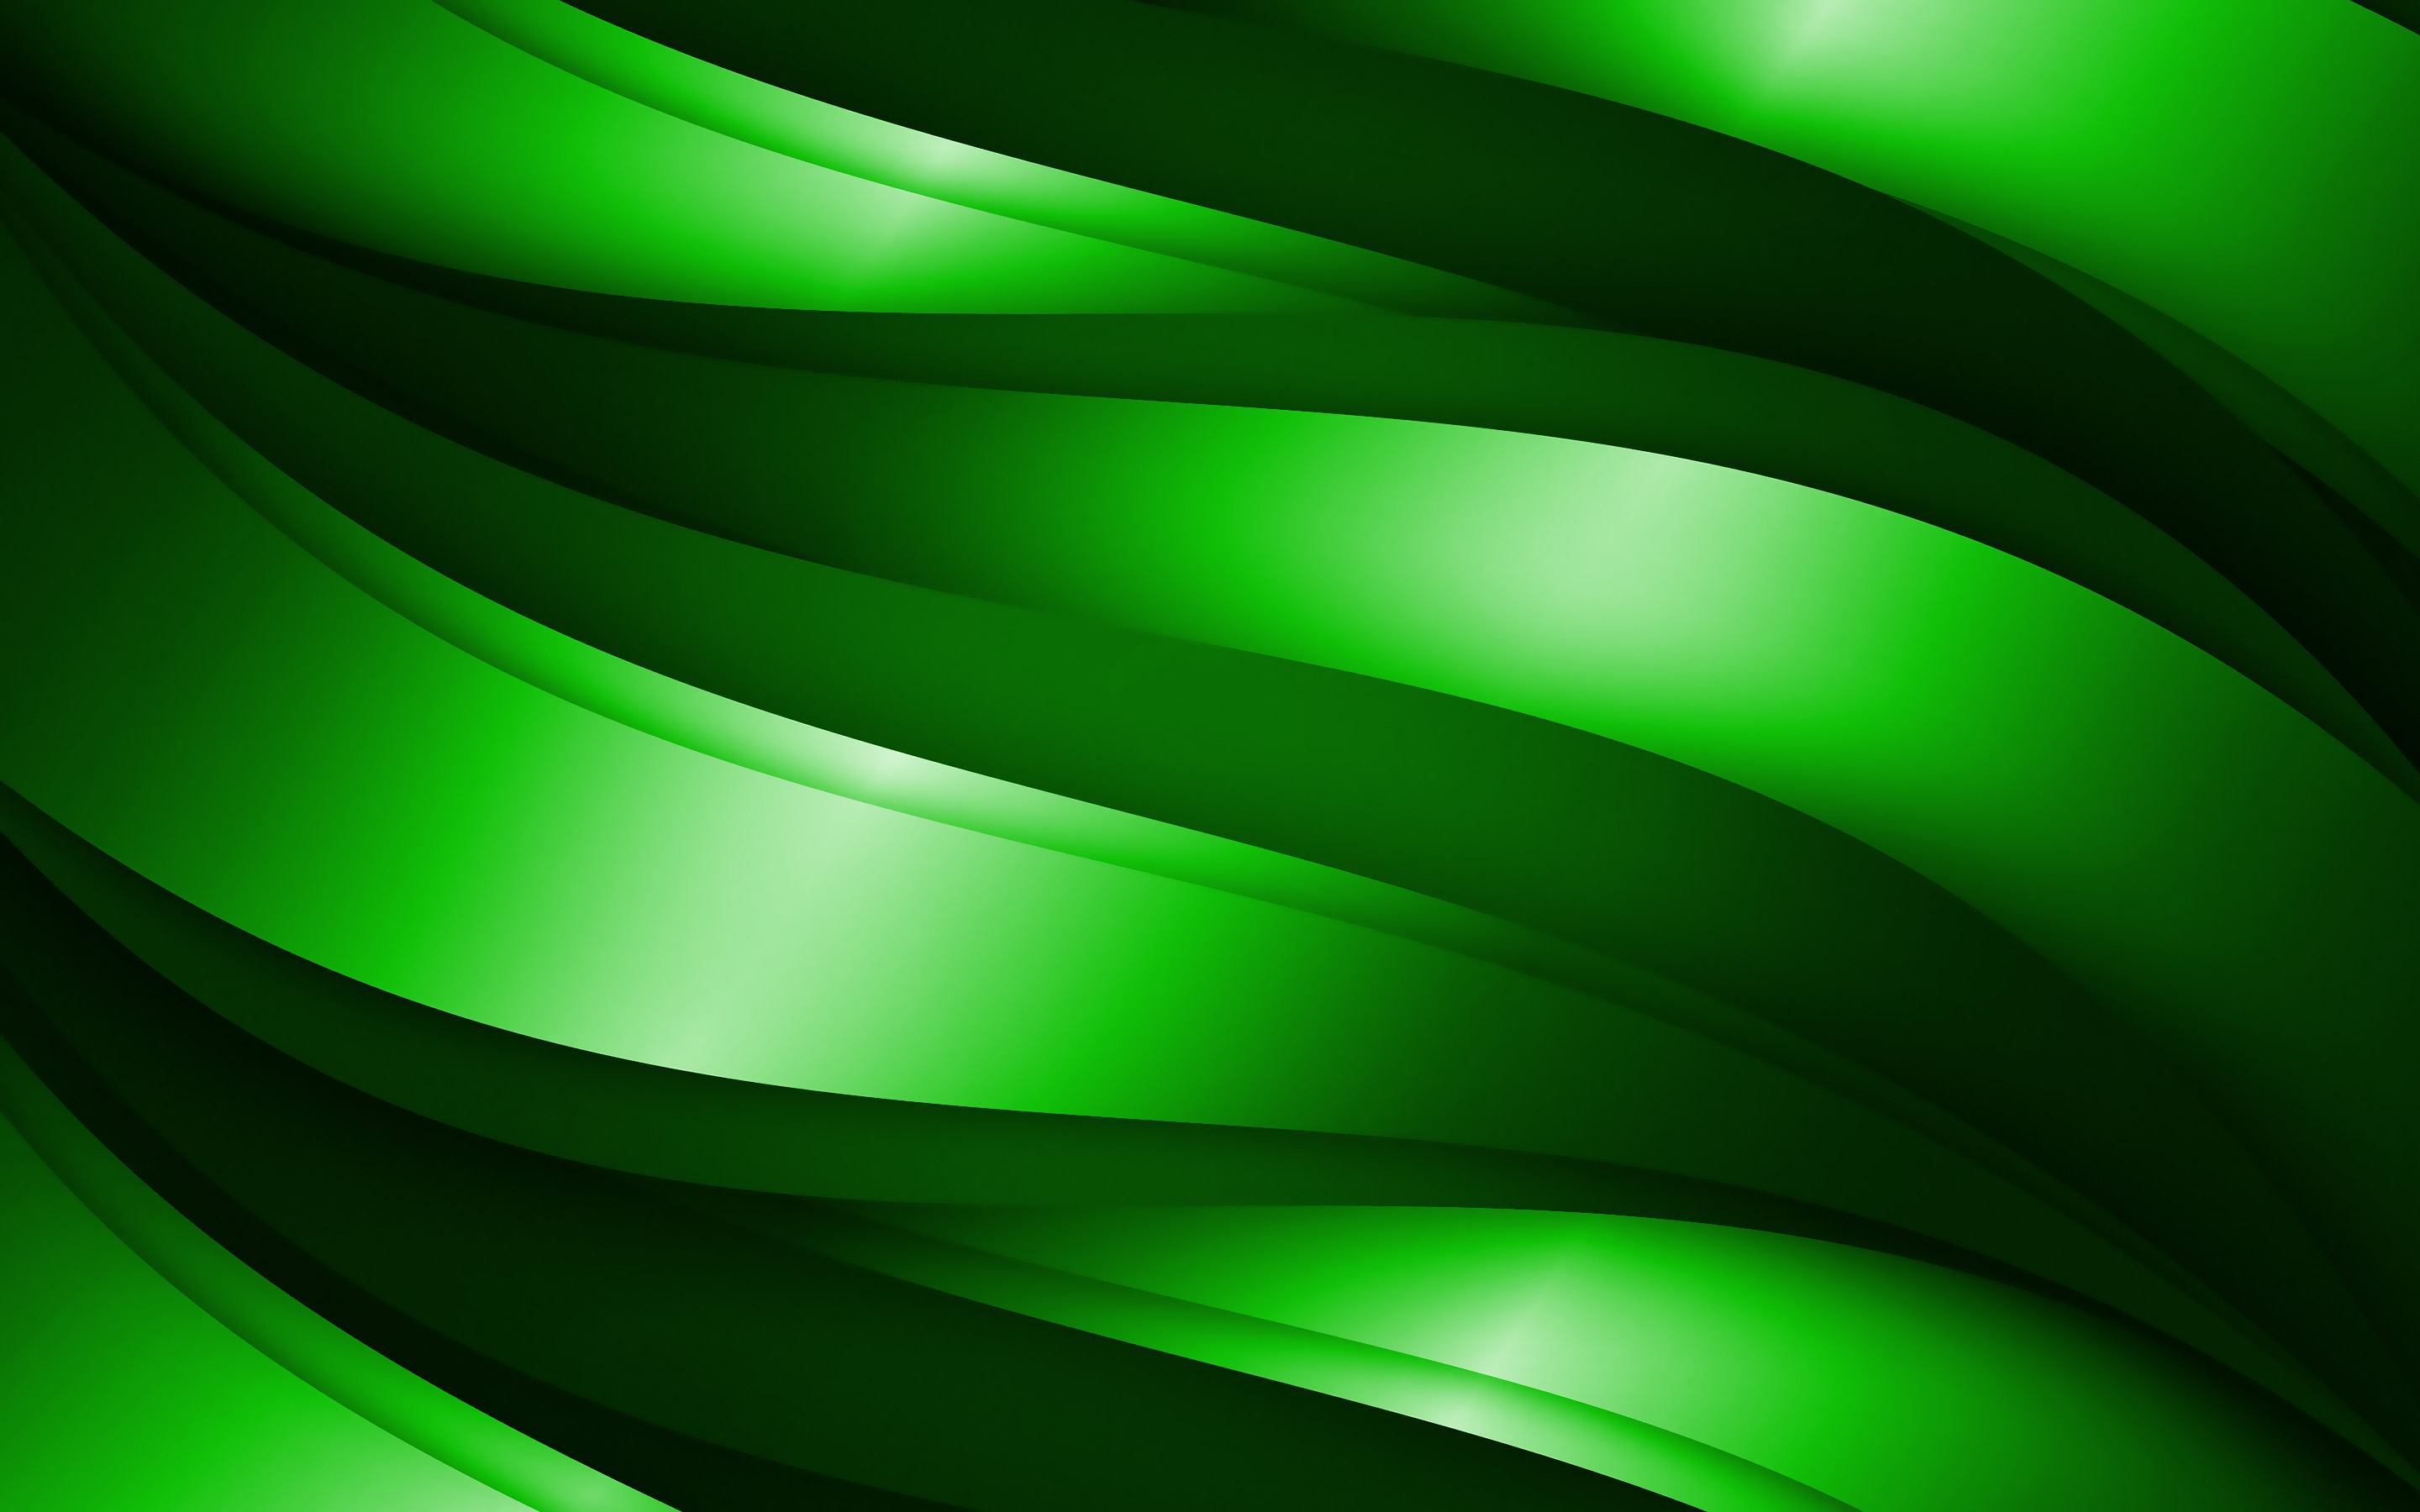 Download wallpaper green 3D waves, abstract waves patterns, waves background, 3D waves, green wavy background, 3D waves textures, wavy textures, background with waves for desktop with resolution 2880x1800. High Quality HD picture